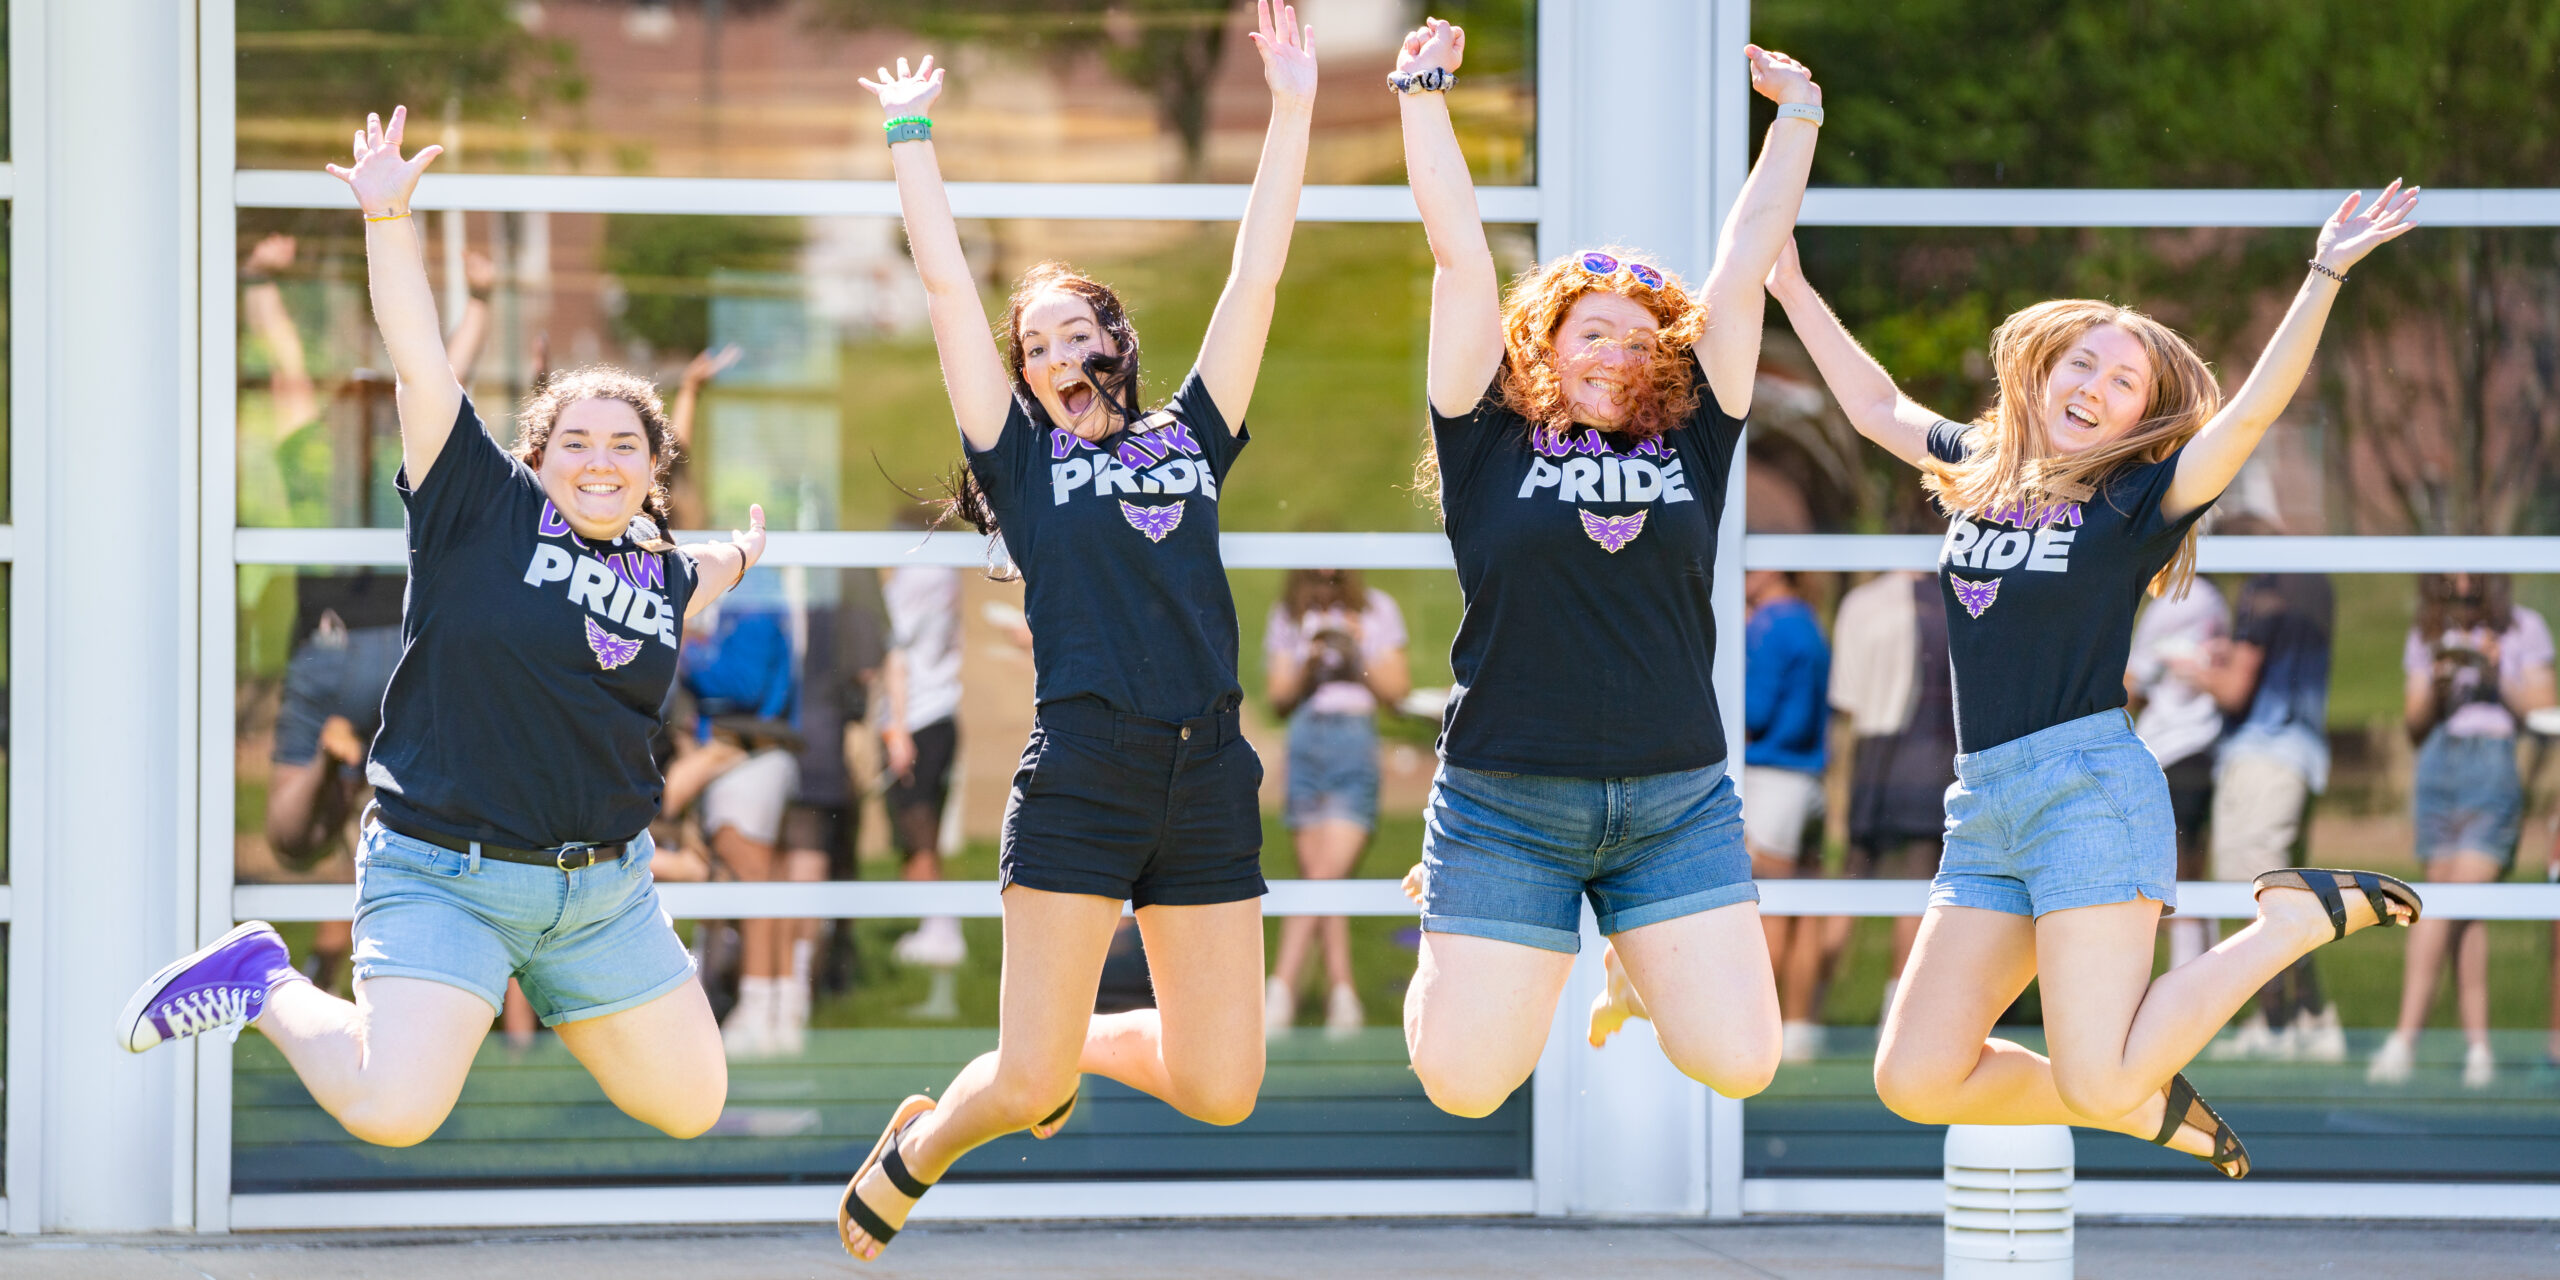 Loras students with loras Duhawk Pride t-shirts jumping in the air and smiling